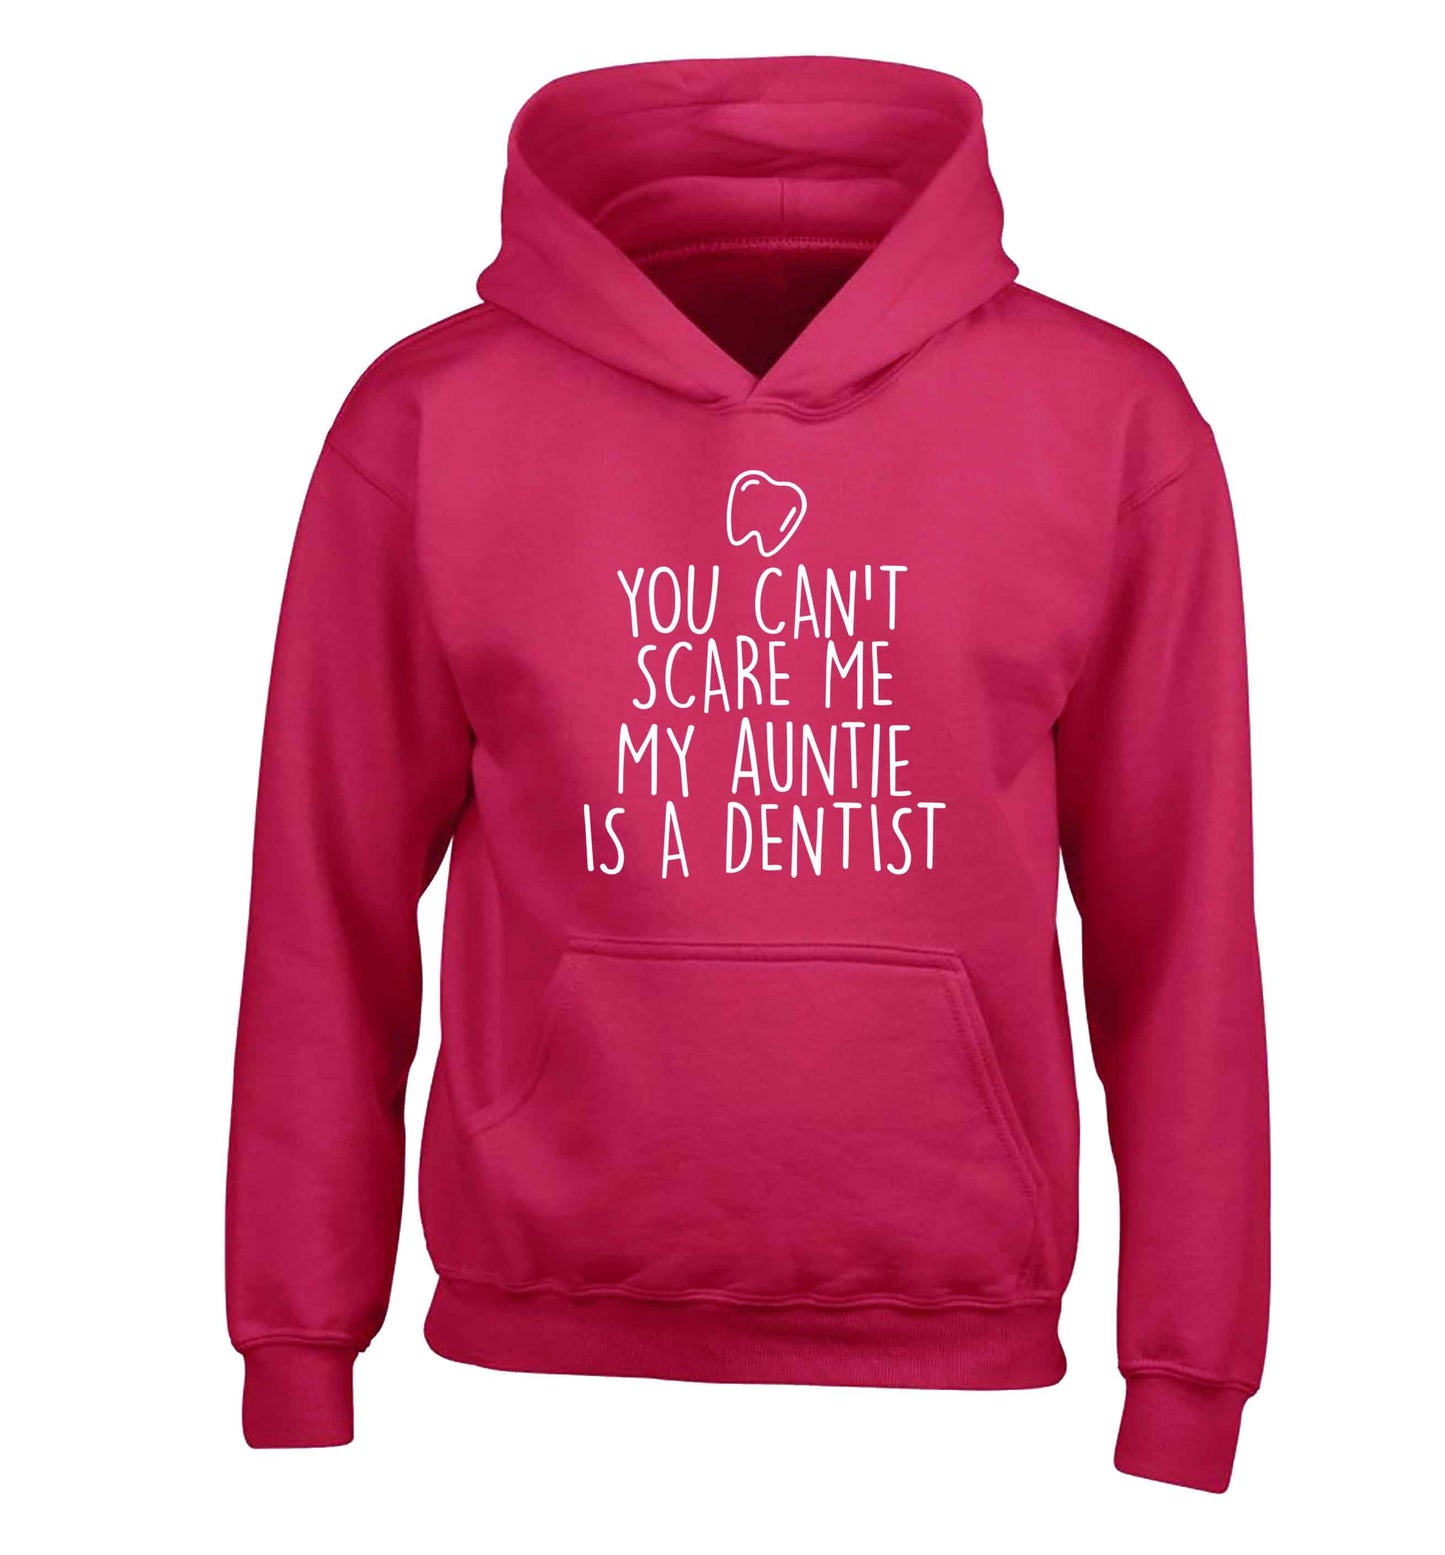 You can't scare me my auntie is a dentist children's pink hoodie 12-13 Years